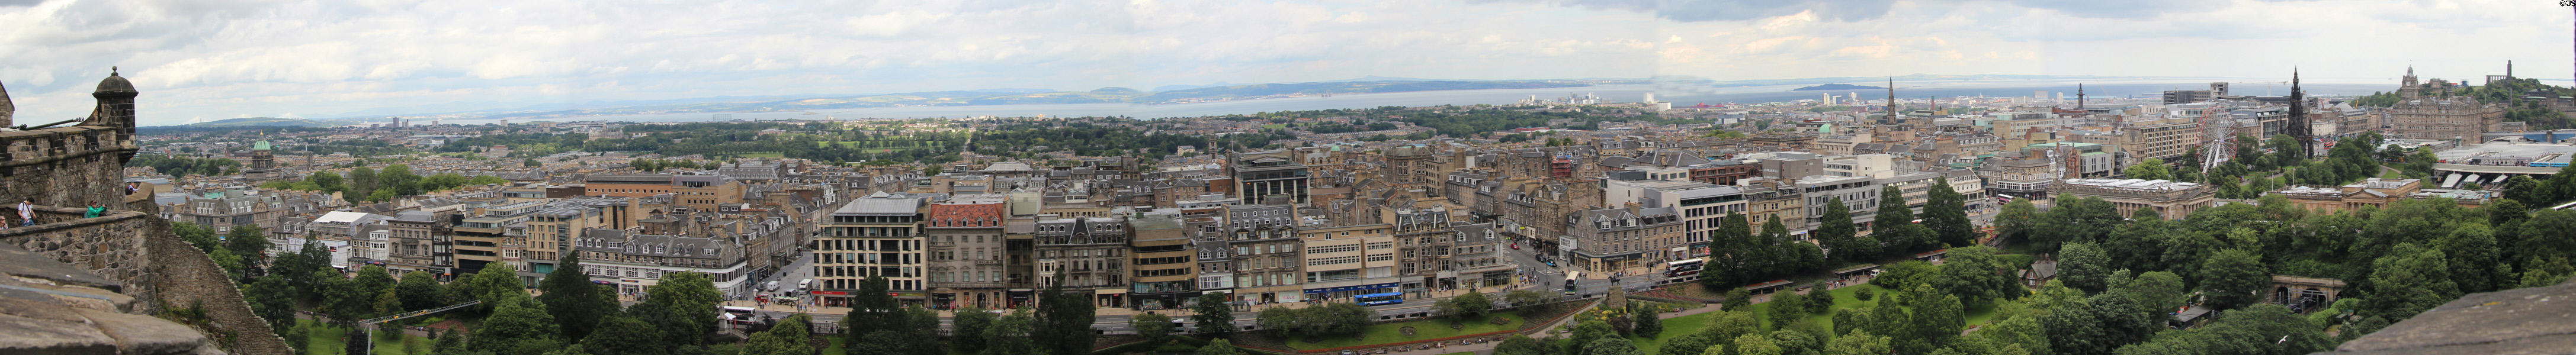 Panorama of New Town with Firth of Forth beyond from Edinburgh Castle. Edinburgh, Scotland.